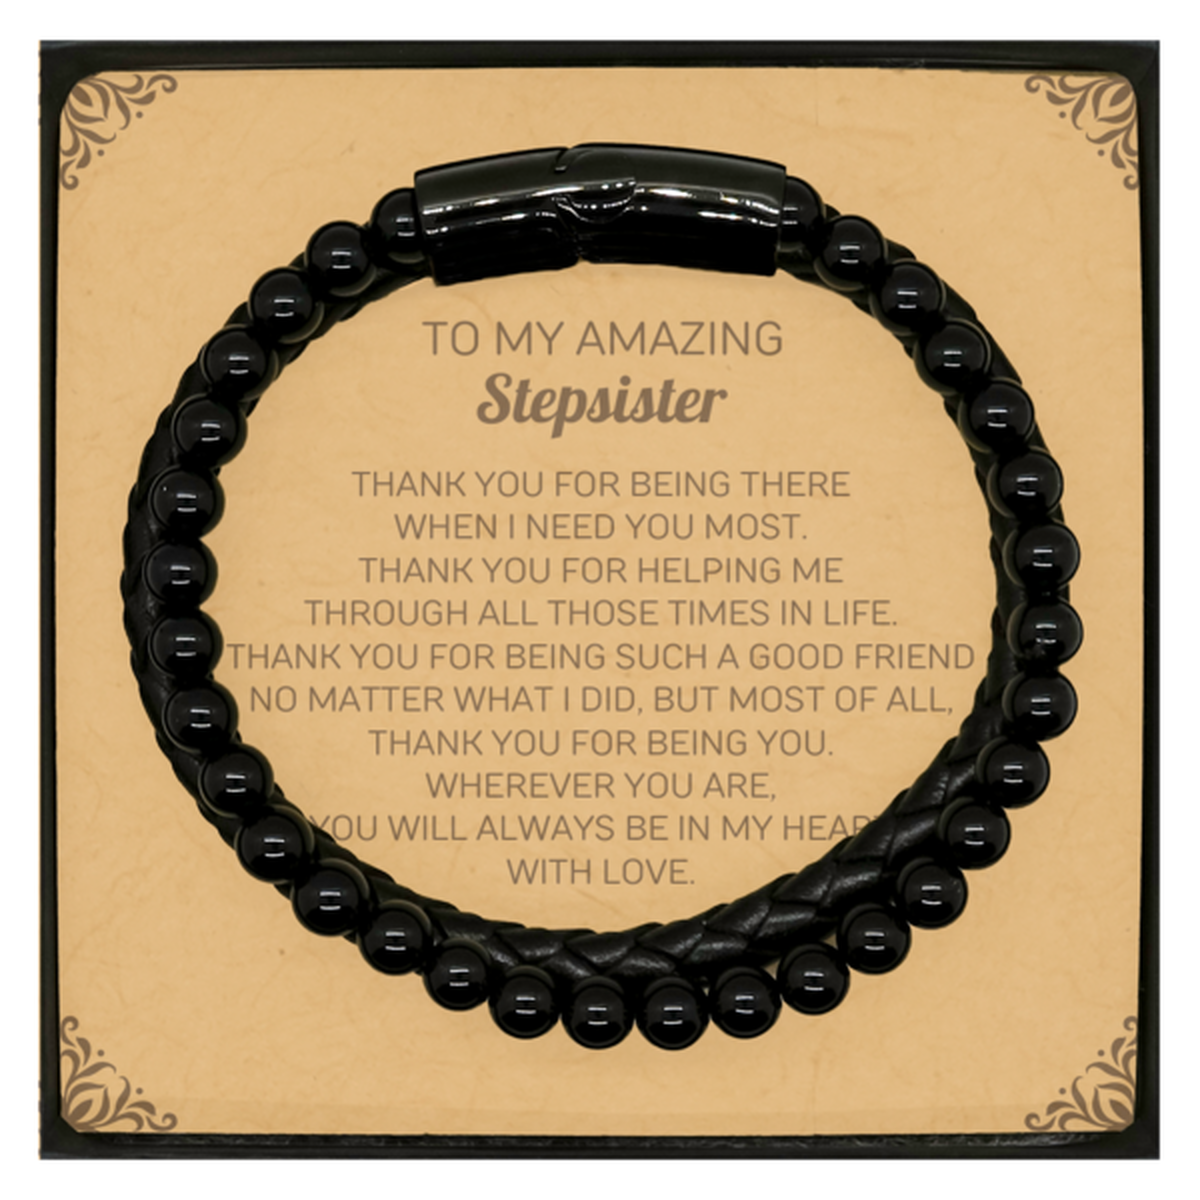 To My Amazing Stepsister Stone Leather Bracelets, Thank you for being there, Thank You Gifts For Stepsister, Birthday, Christmas Unique Gifts For Stepsister